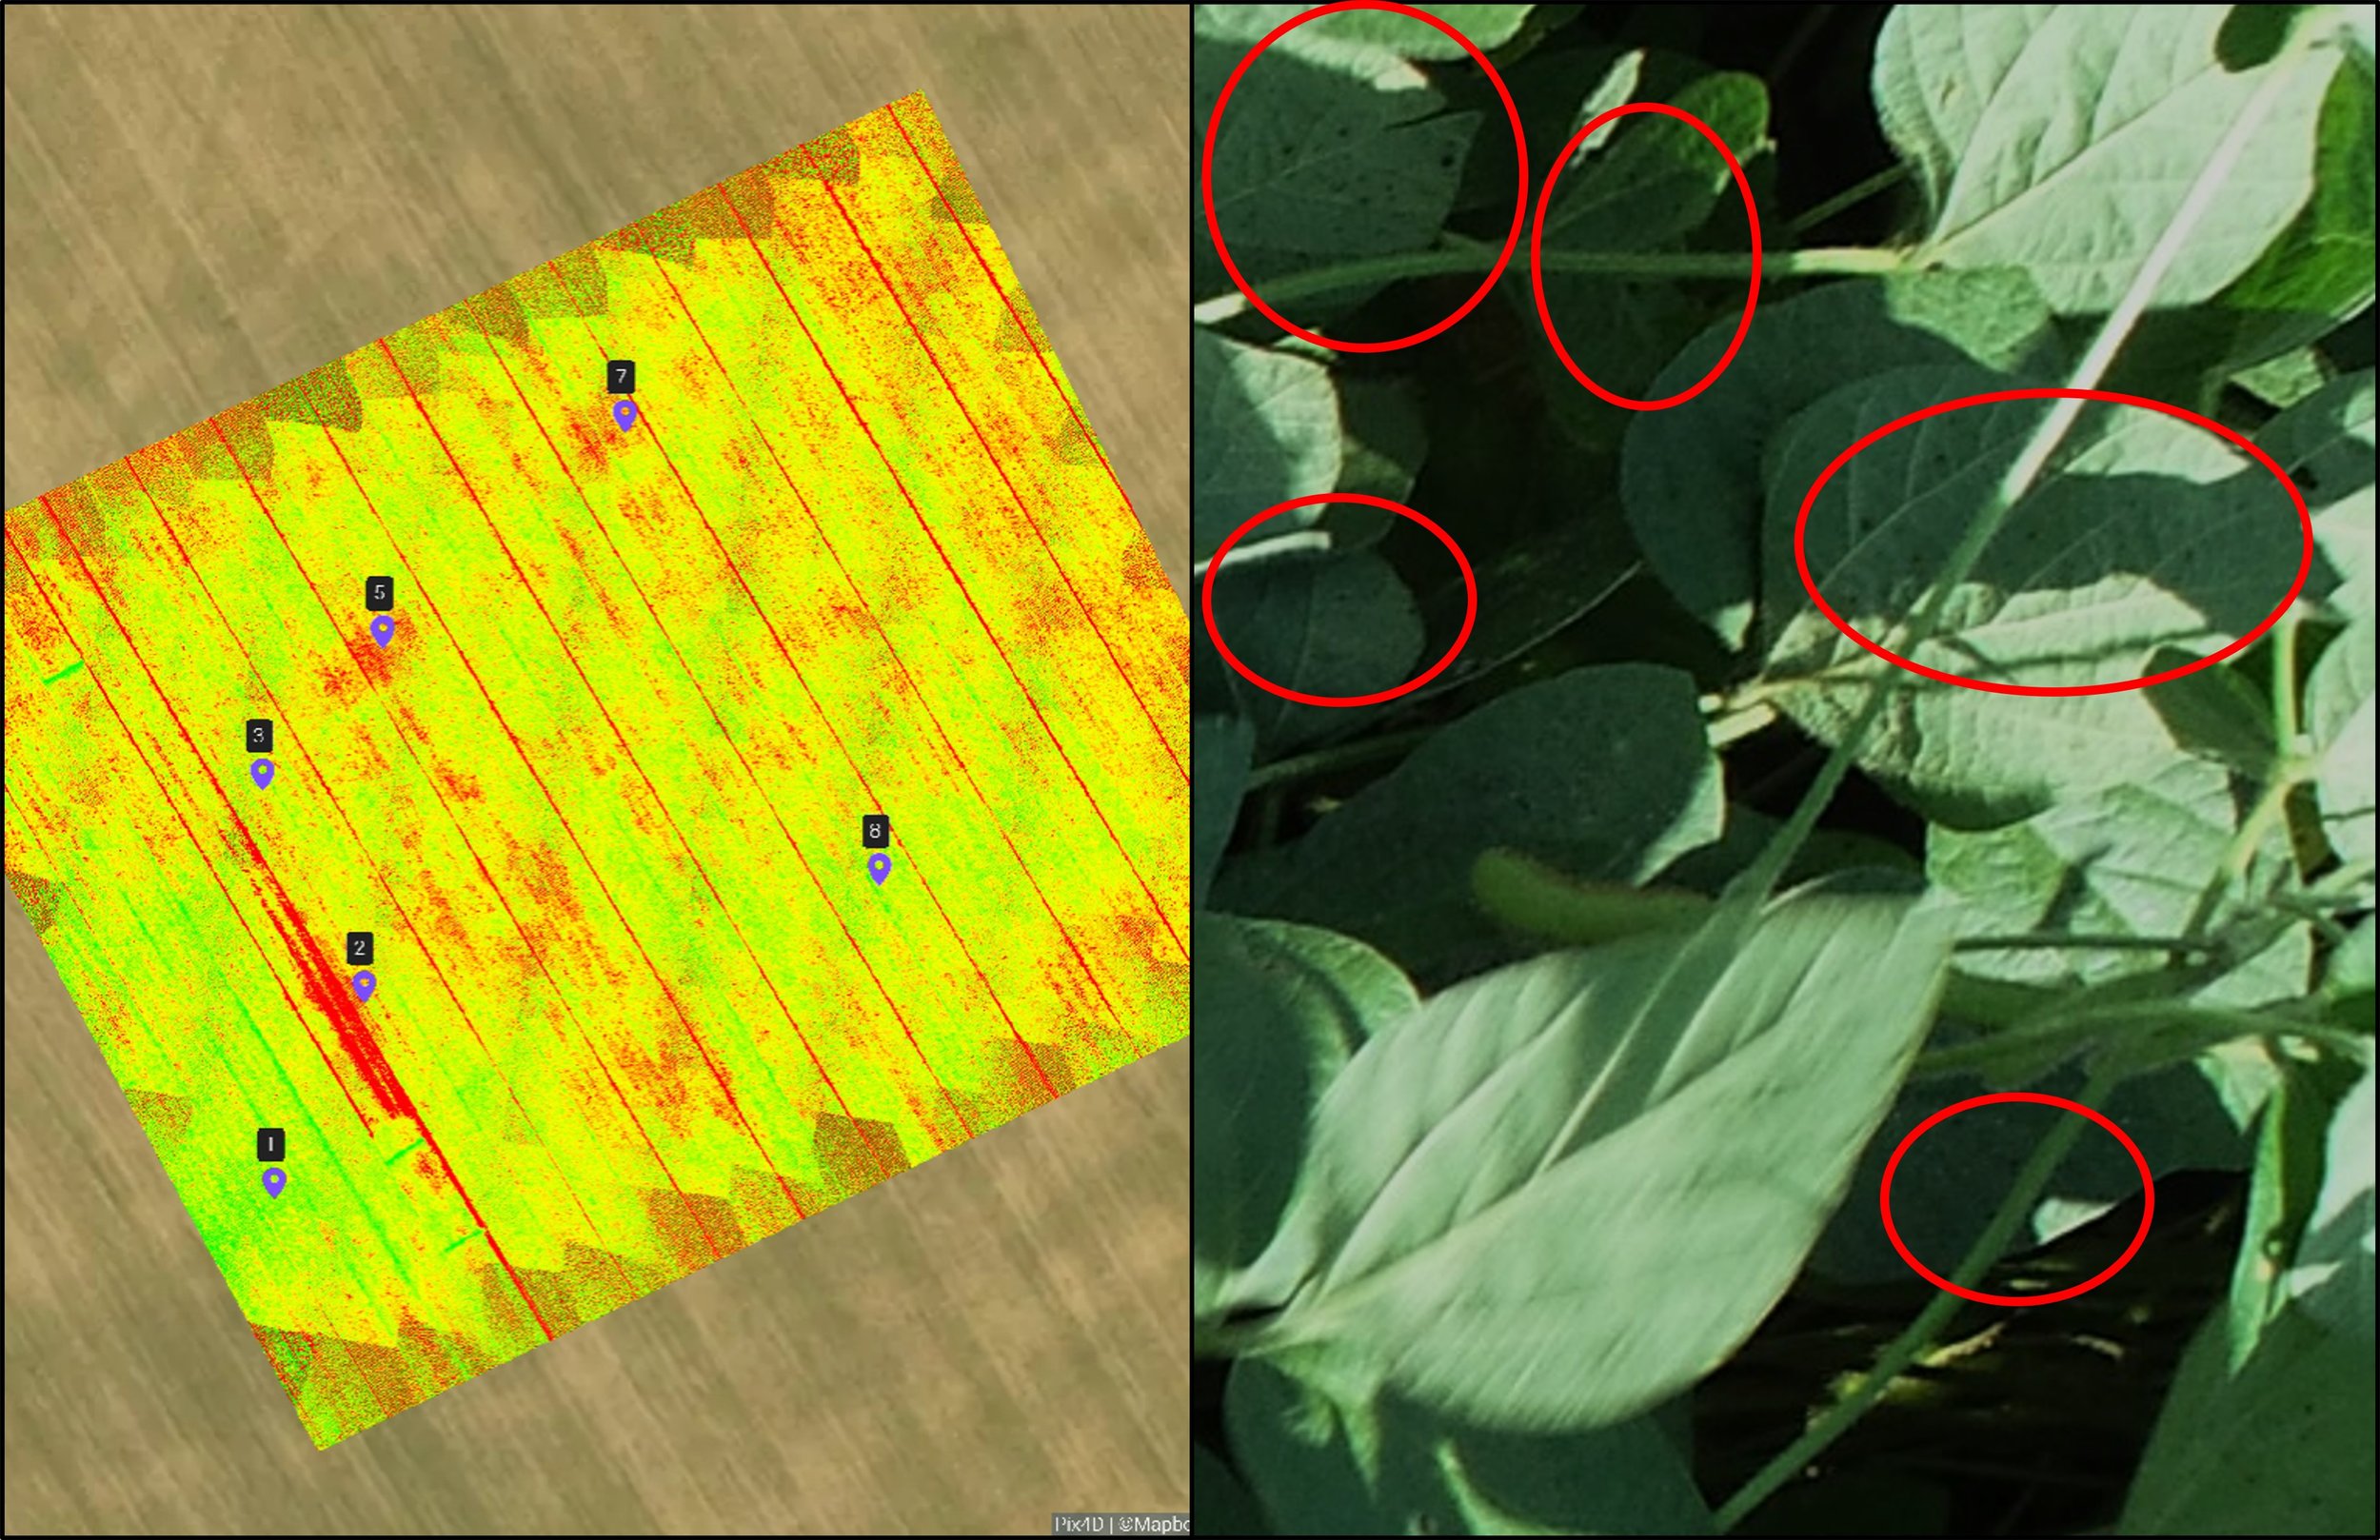 Aphid detection on soybean field